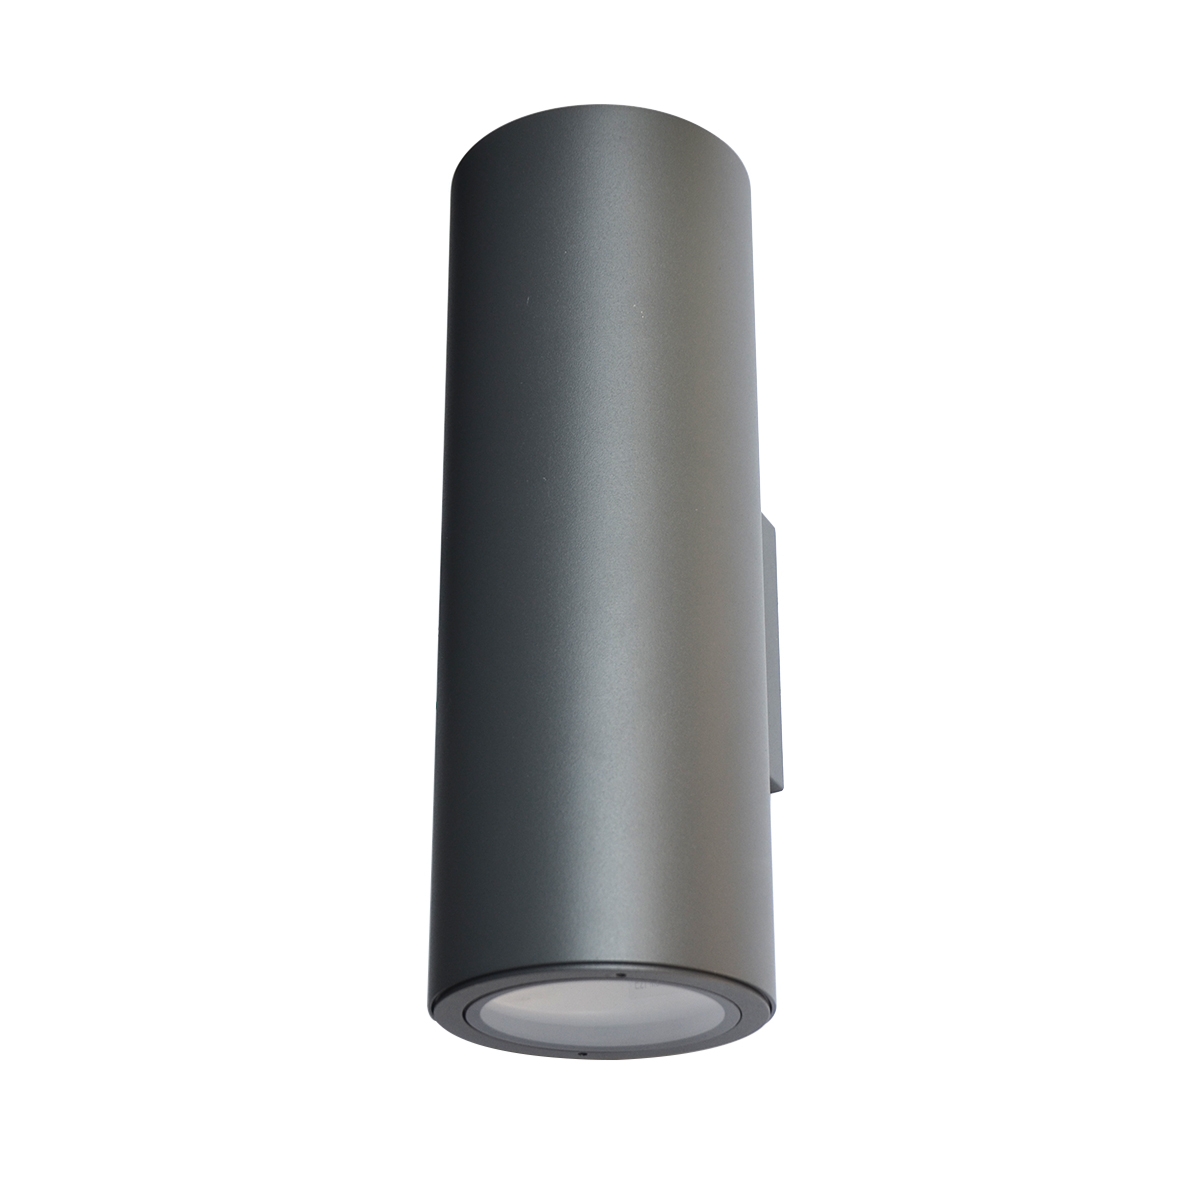 Up & Down Light 7201A IP54 - Graphite